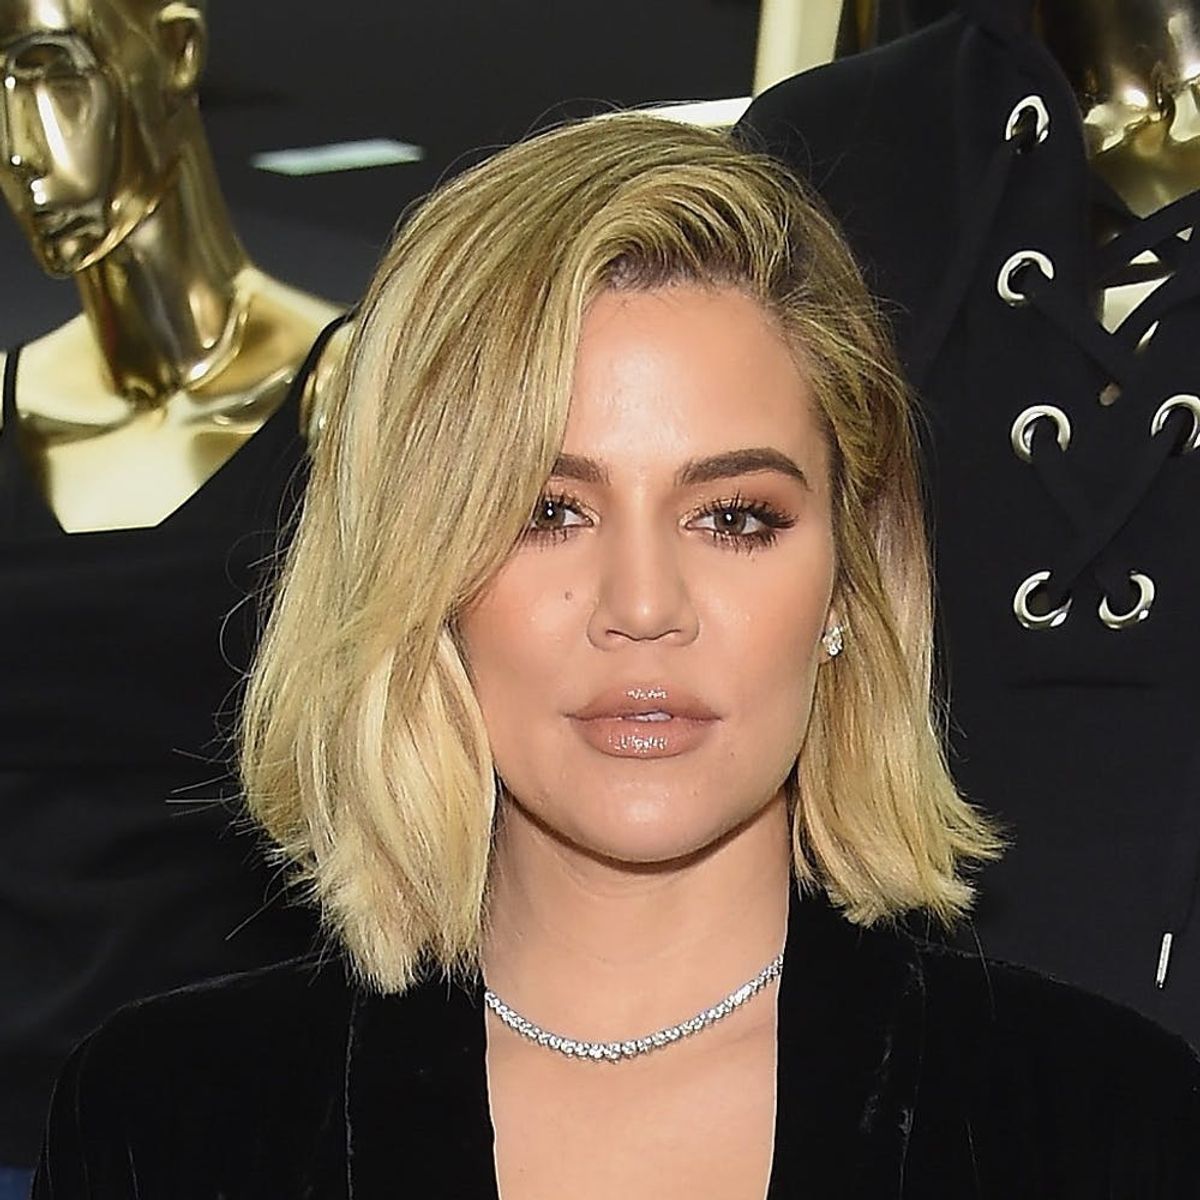 Khloé Kardashian’s Go-To Acne Cleanser Costs $10 